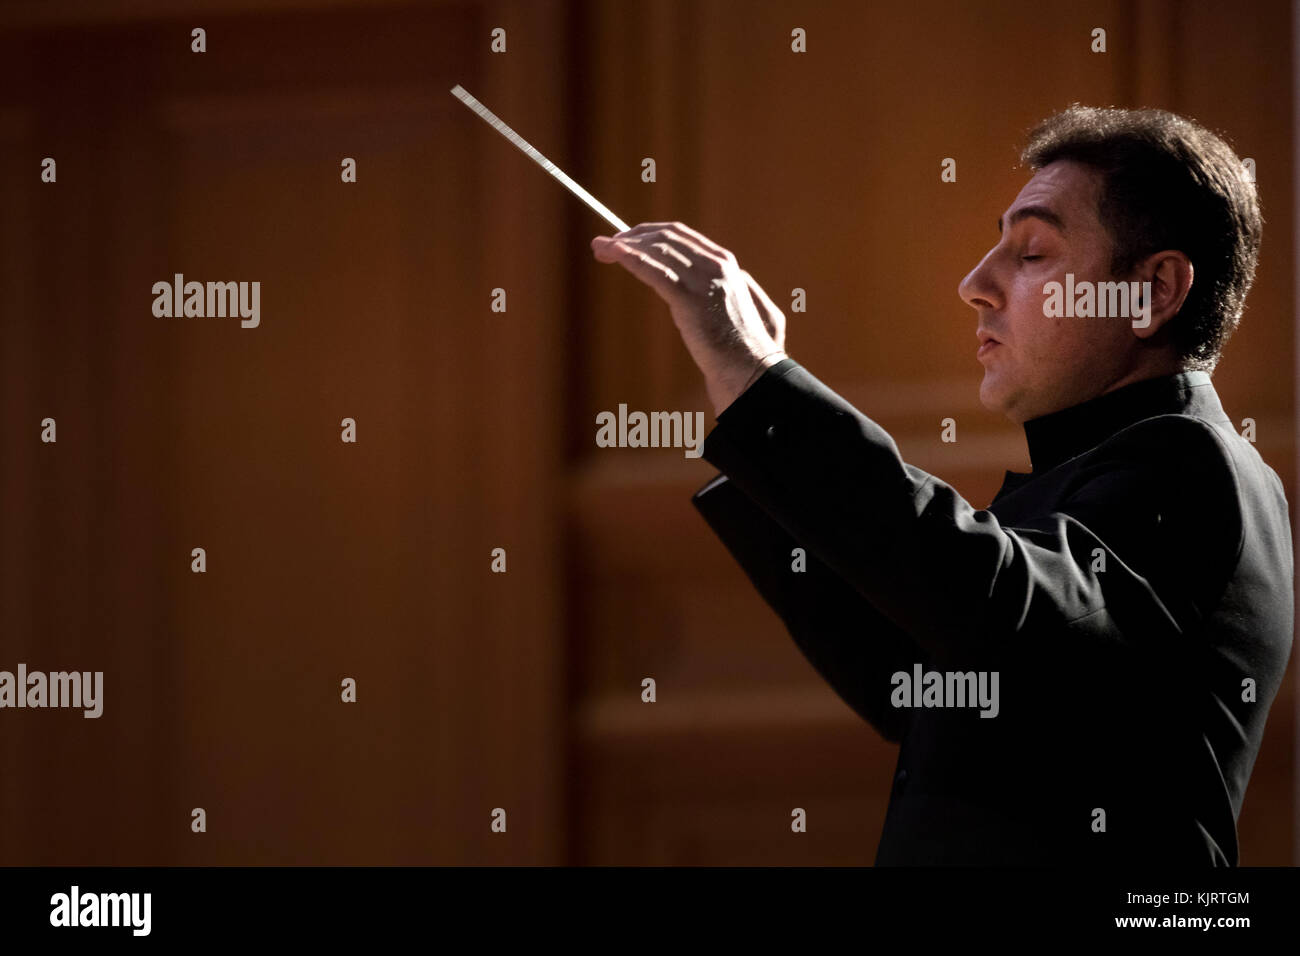 Conductor Eduard Topchyan on the stage of the Great Hall of the Conservatory in Moscow while conducting the orchestra, Russia Stock Photo